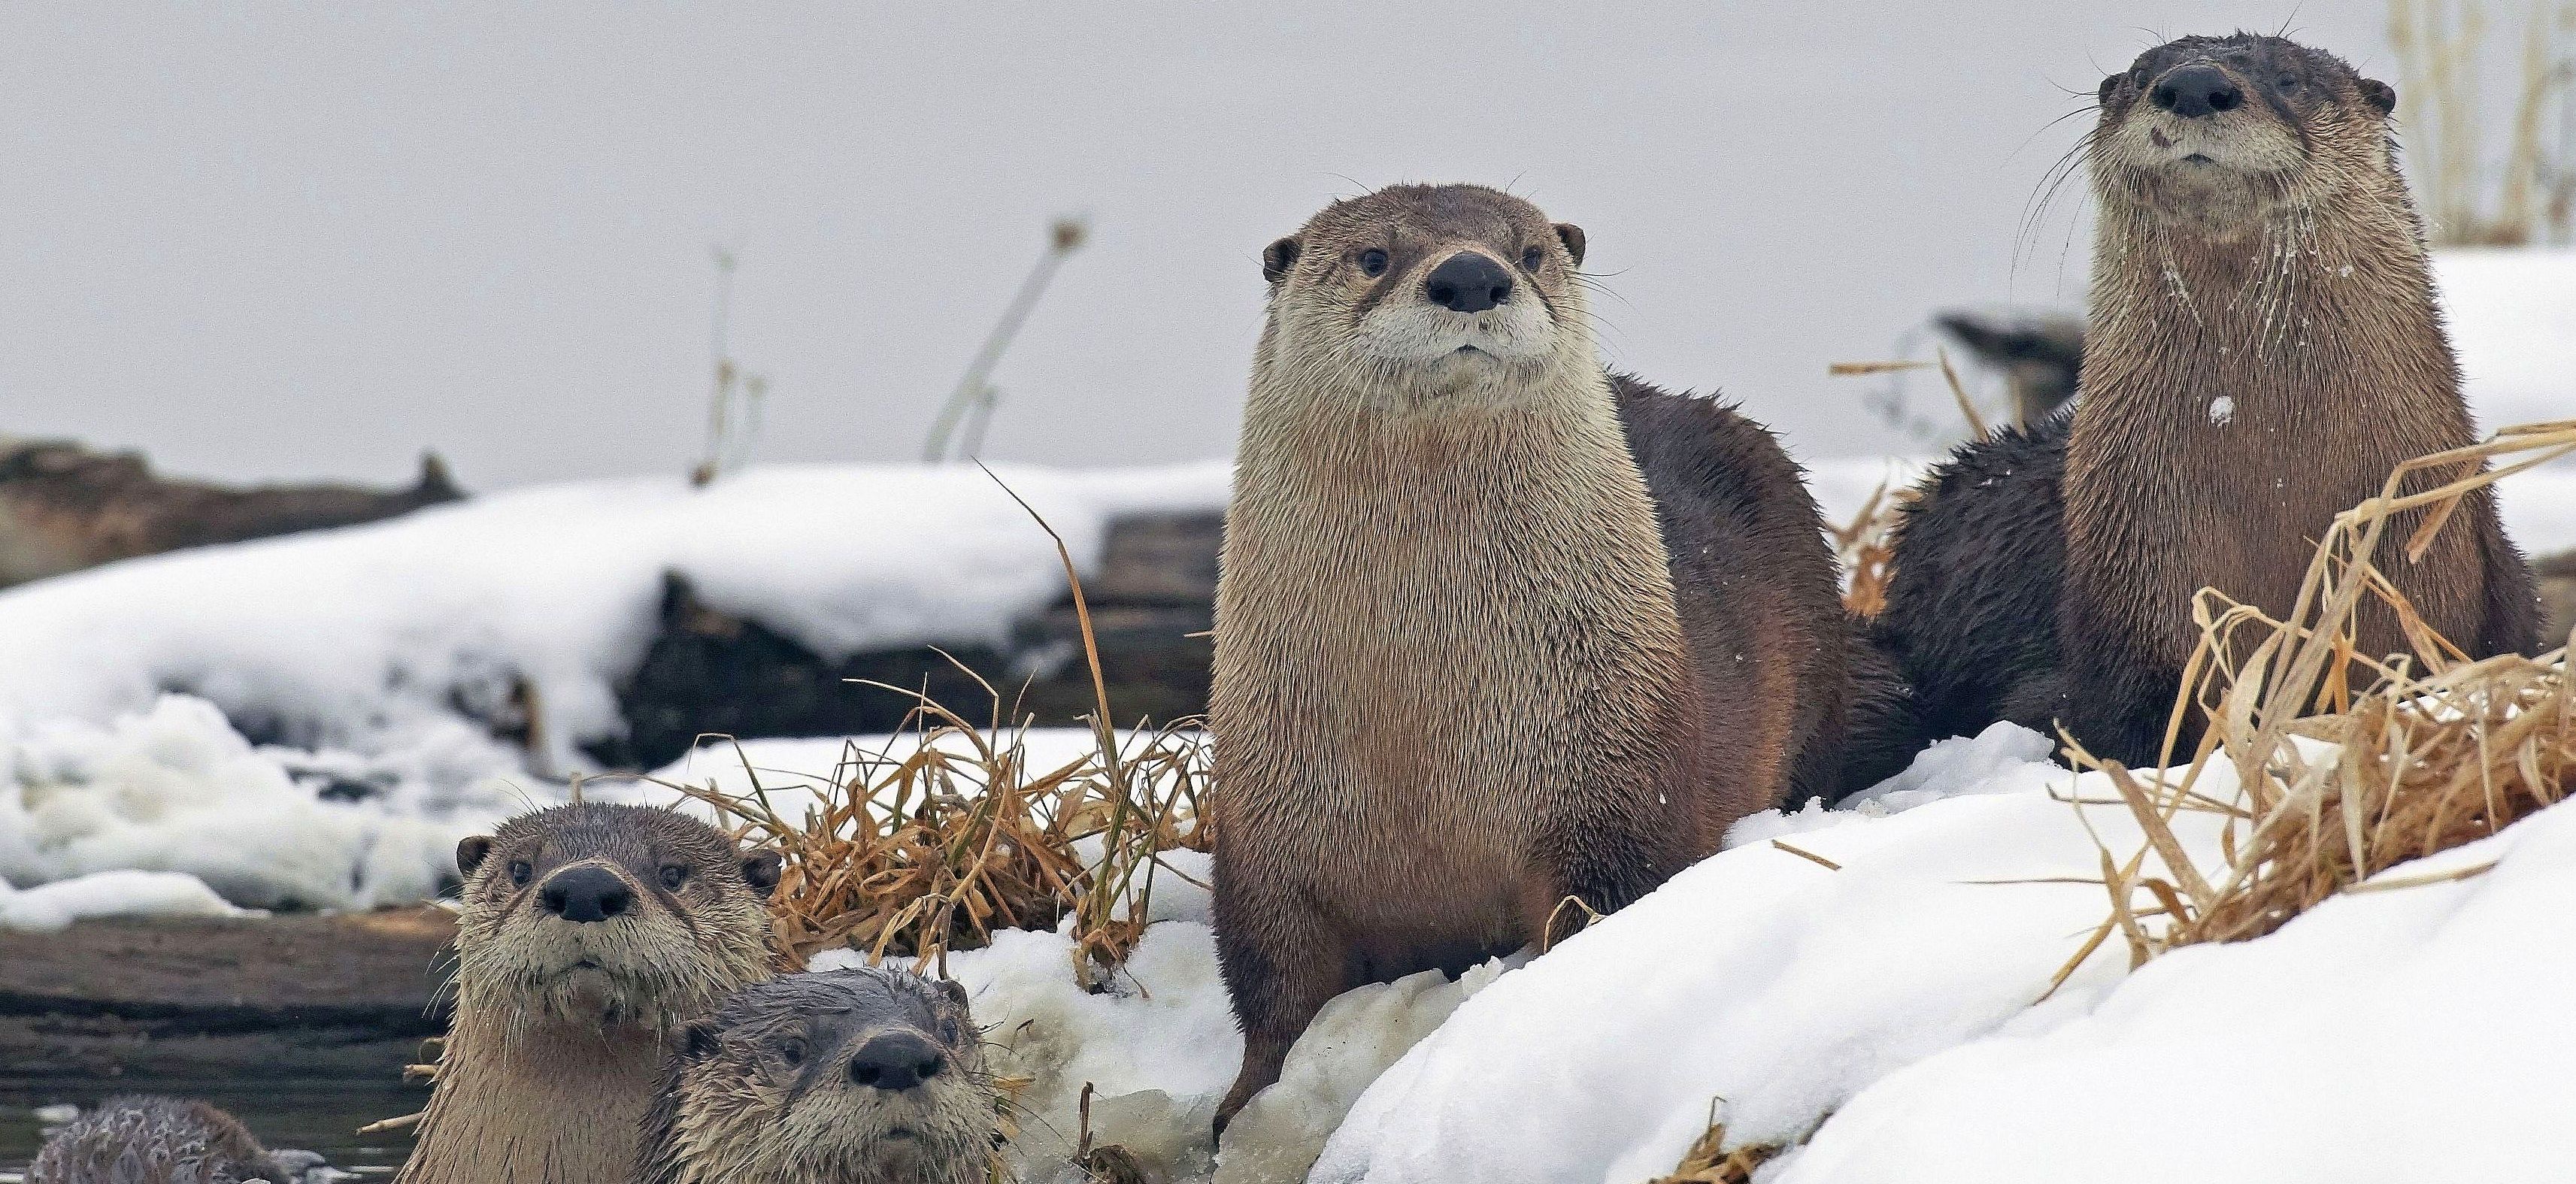 A group of river otters look at the camera from along the snowy riverbank at Loess Bluffs National Wildlife Refuge in Missouri.